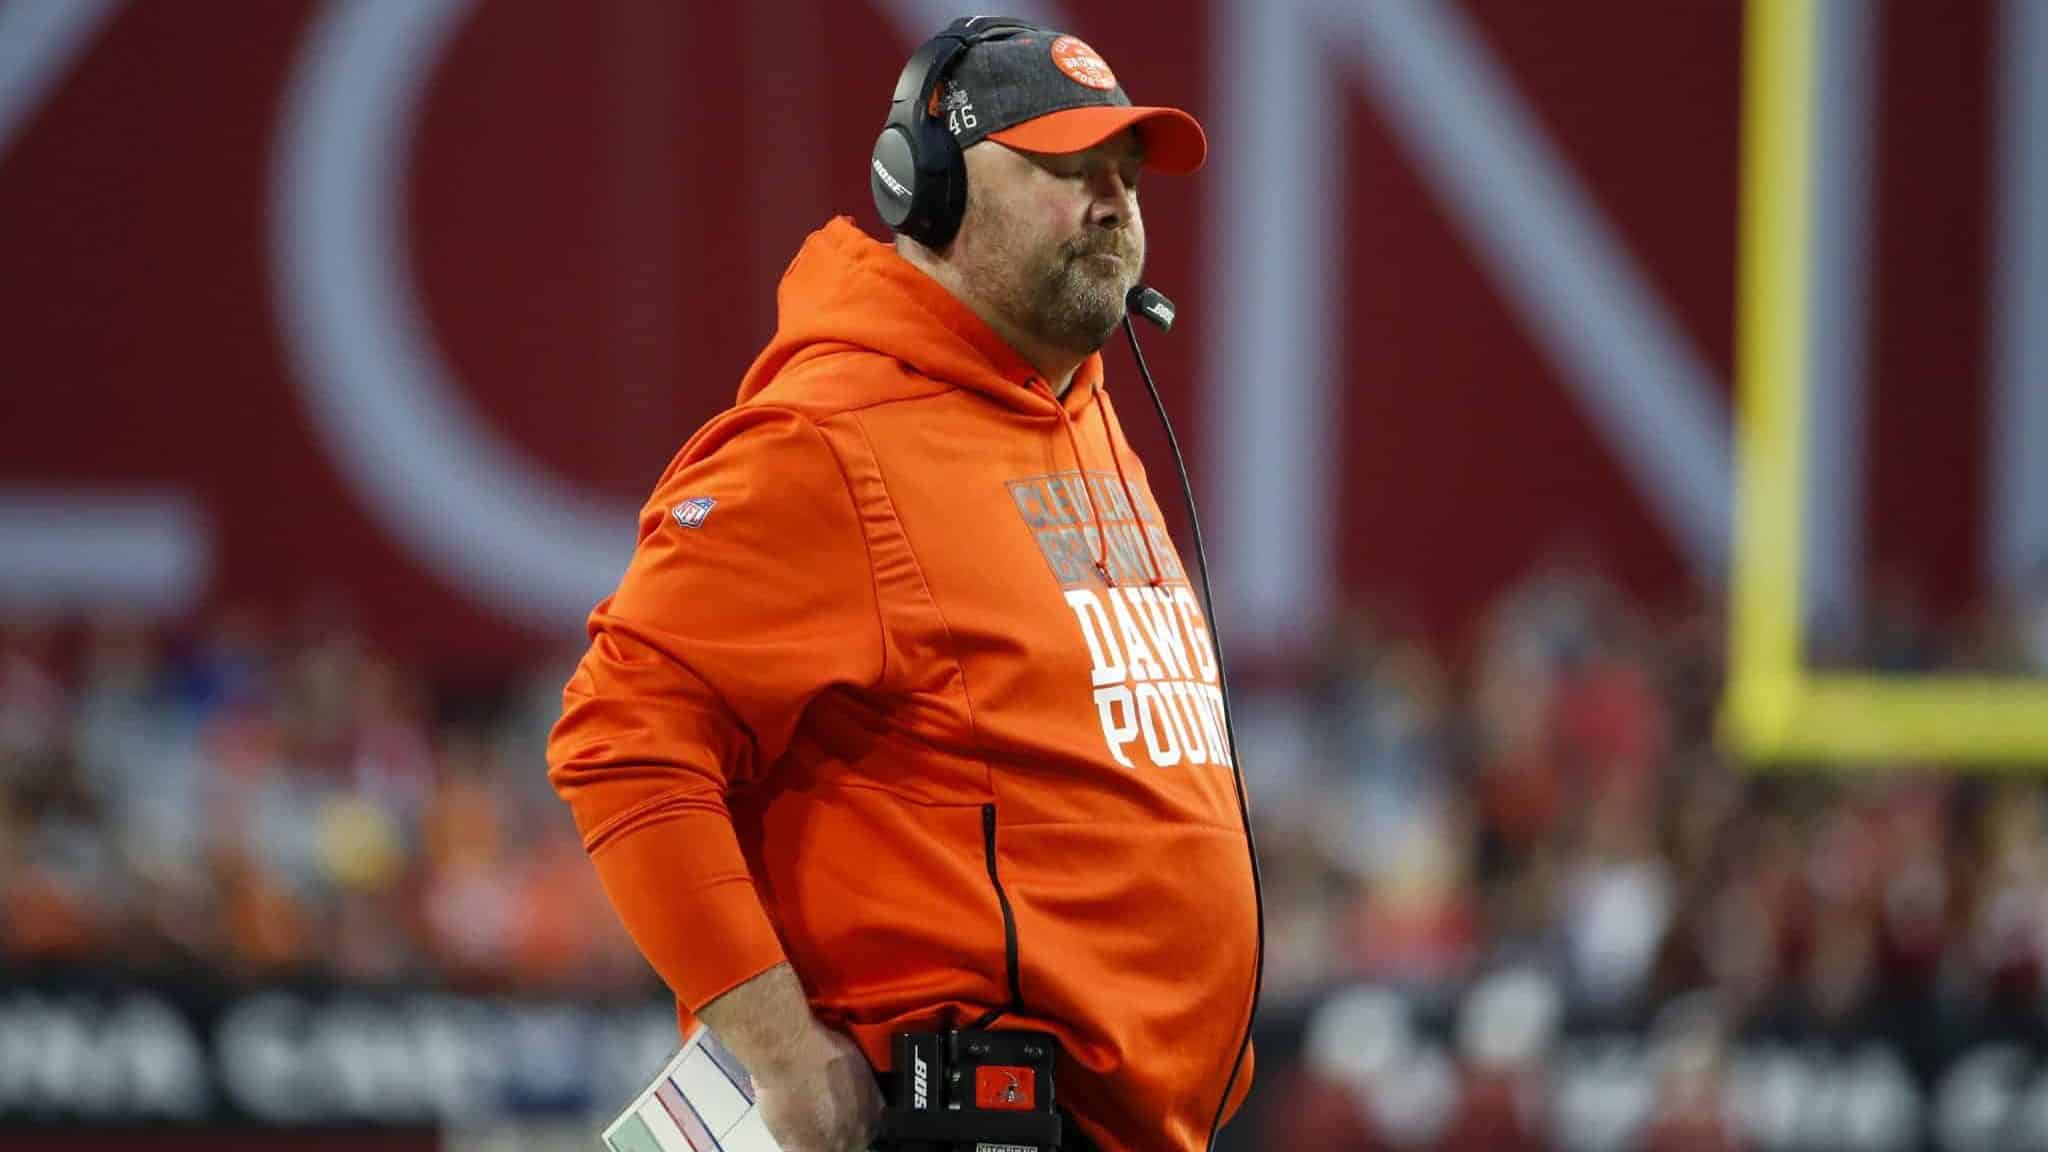 GLENDALE, ARIZONA - DECEMBER 15: Head coach Freddie Kitchens of the Cleveland Browns reacts after a play against the Arizona Cardinals during the second half of the NFL football game at State Farm Stadium on December 15, 2019 in Glendale, Arizona. The Cardinals defeated the Browns 38-24.